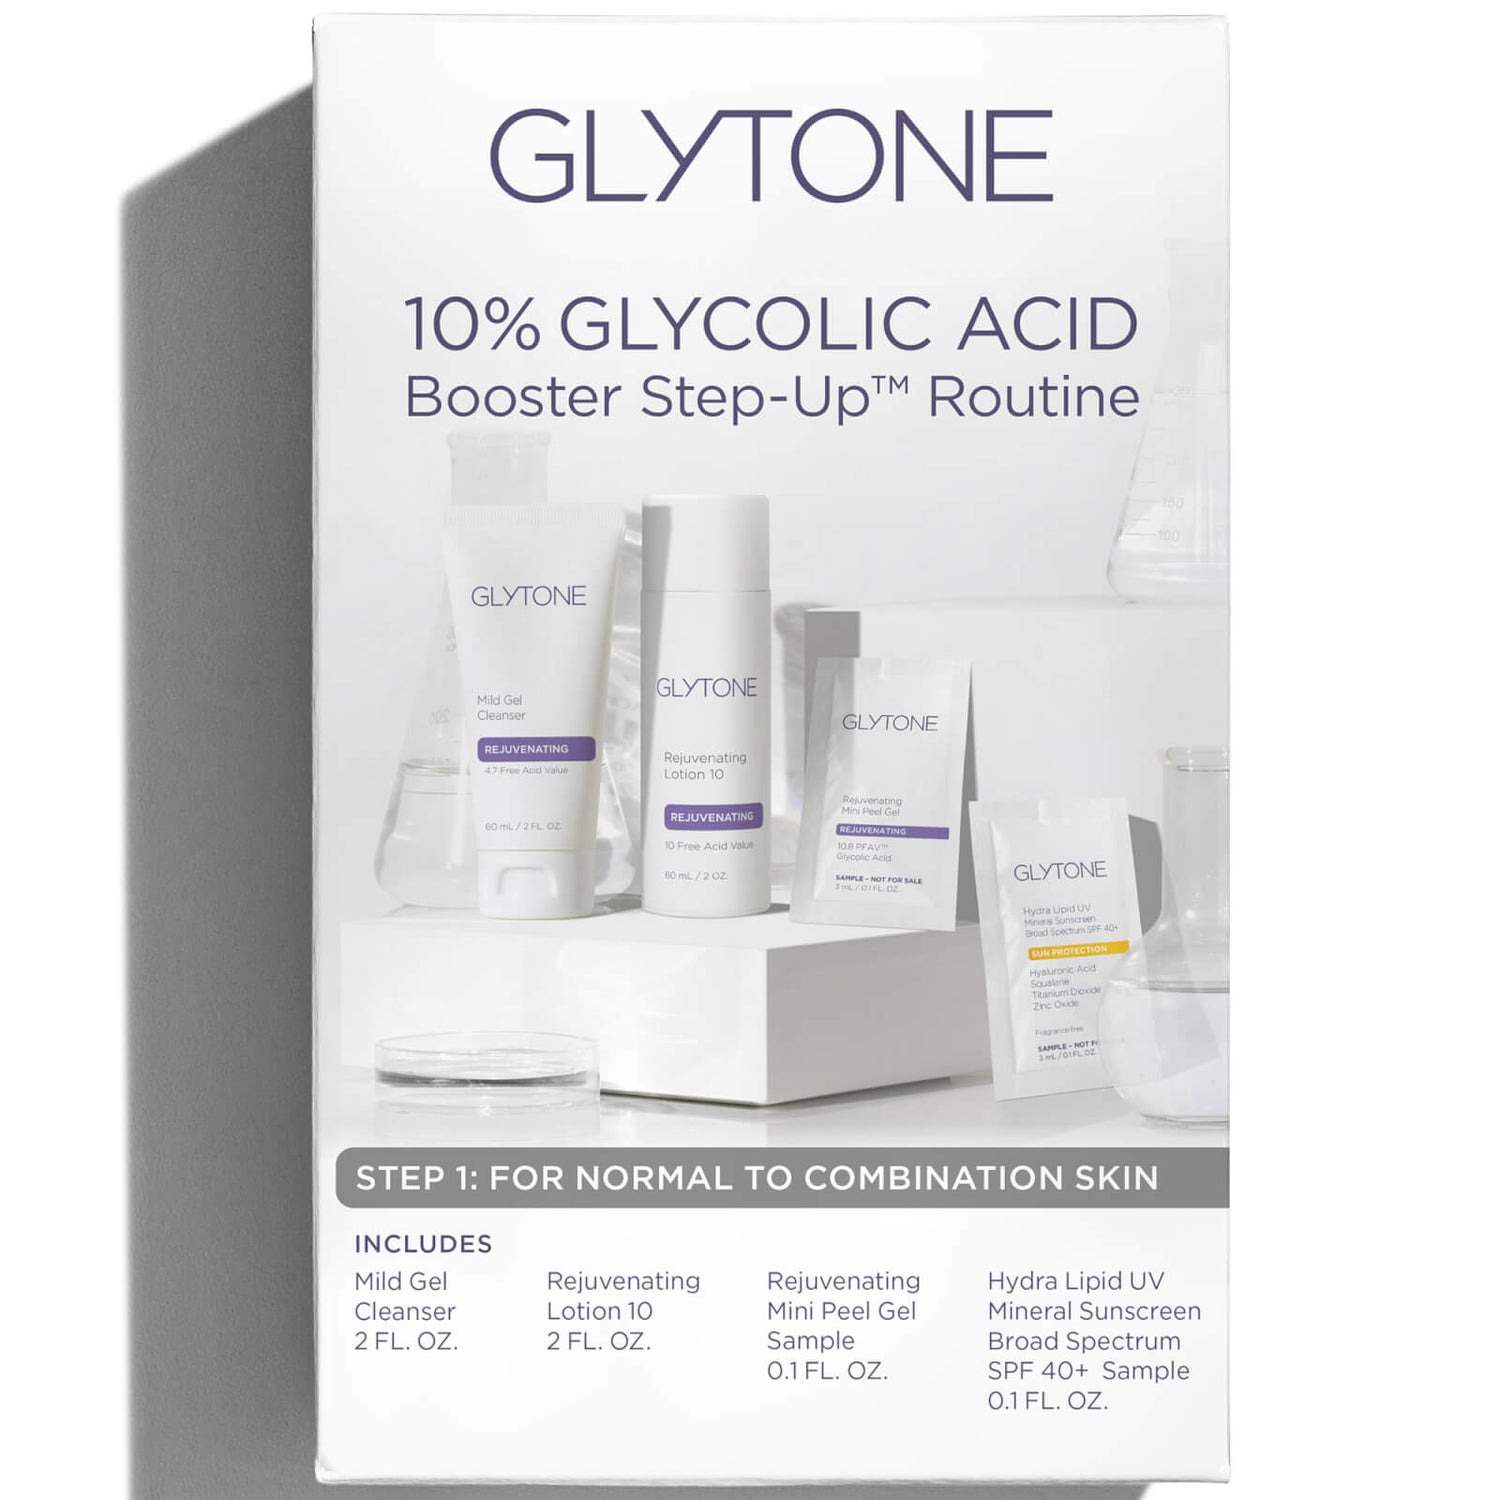 Glytone 10% Glycolic Acid Booster Step-Up Routine: Step 1 For Normal to Combination Skin